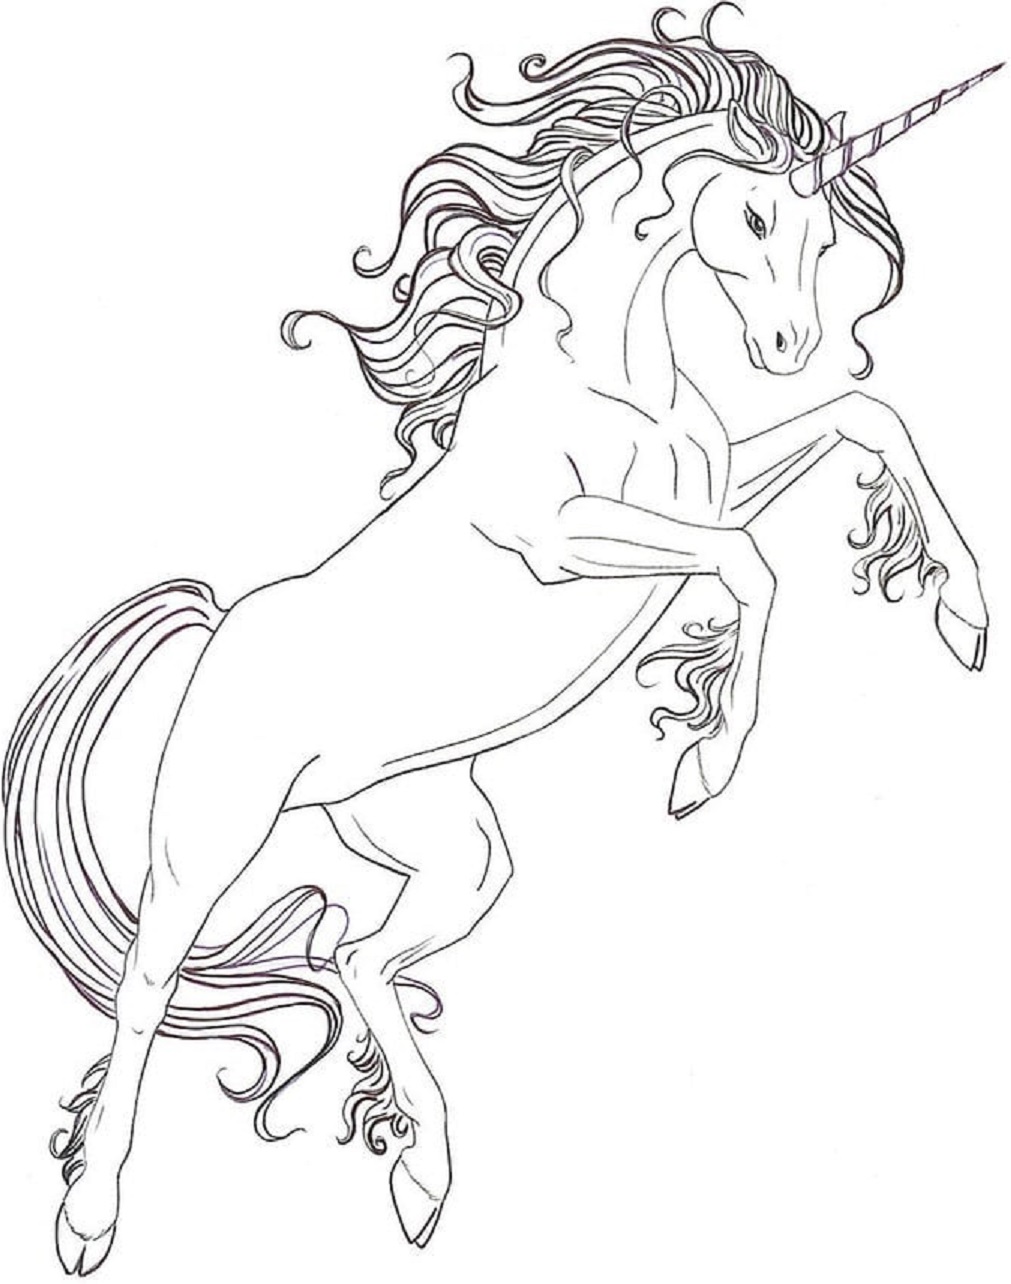 Unicorn Jumping Coloring Page - Free Printable Coloring Pages for Kids